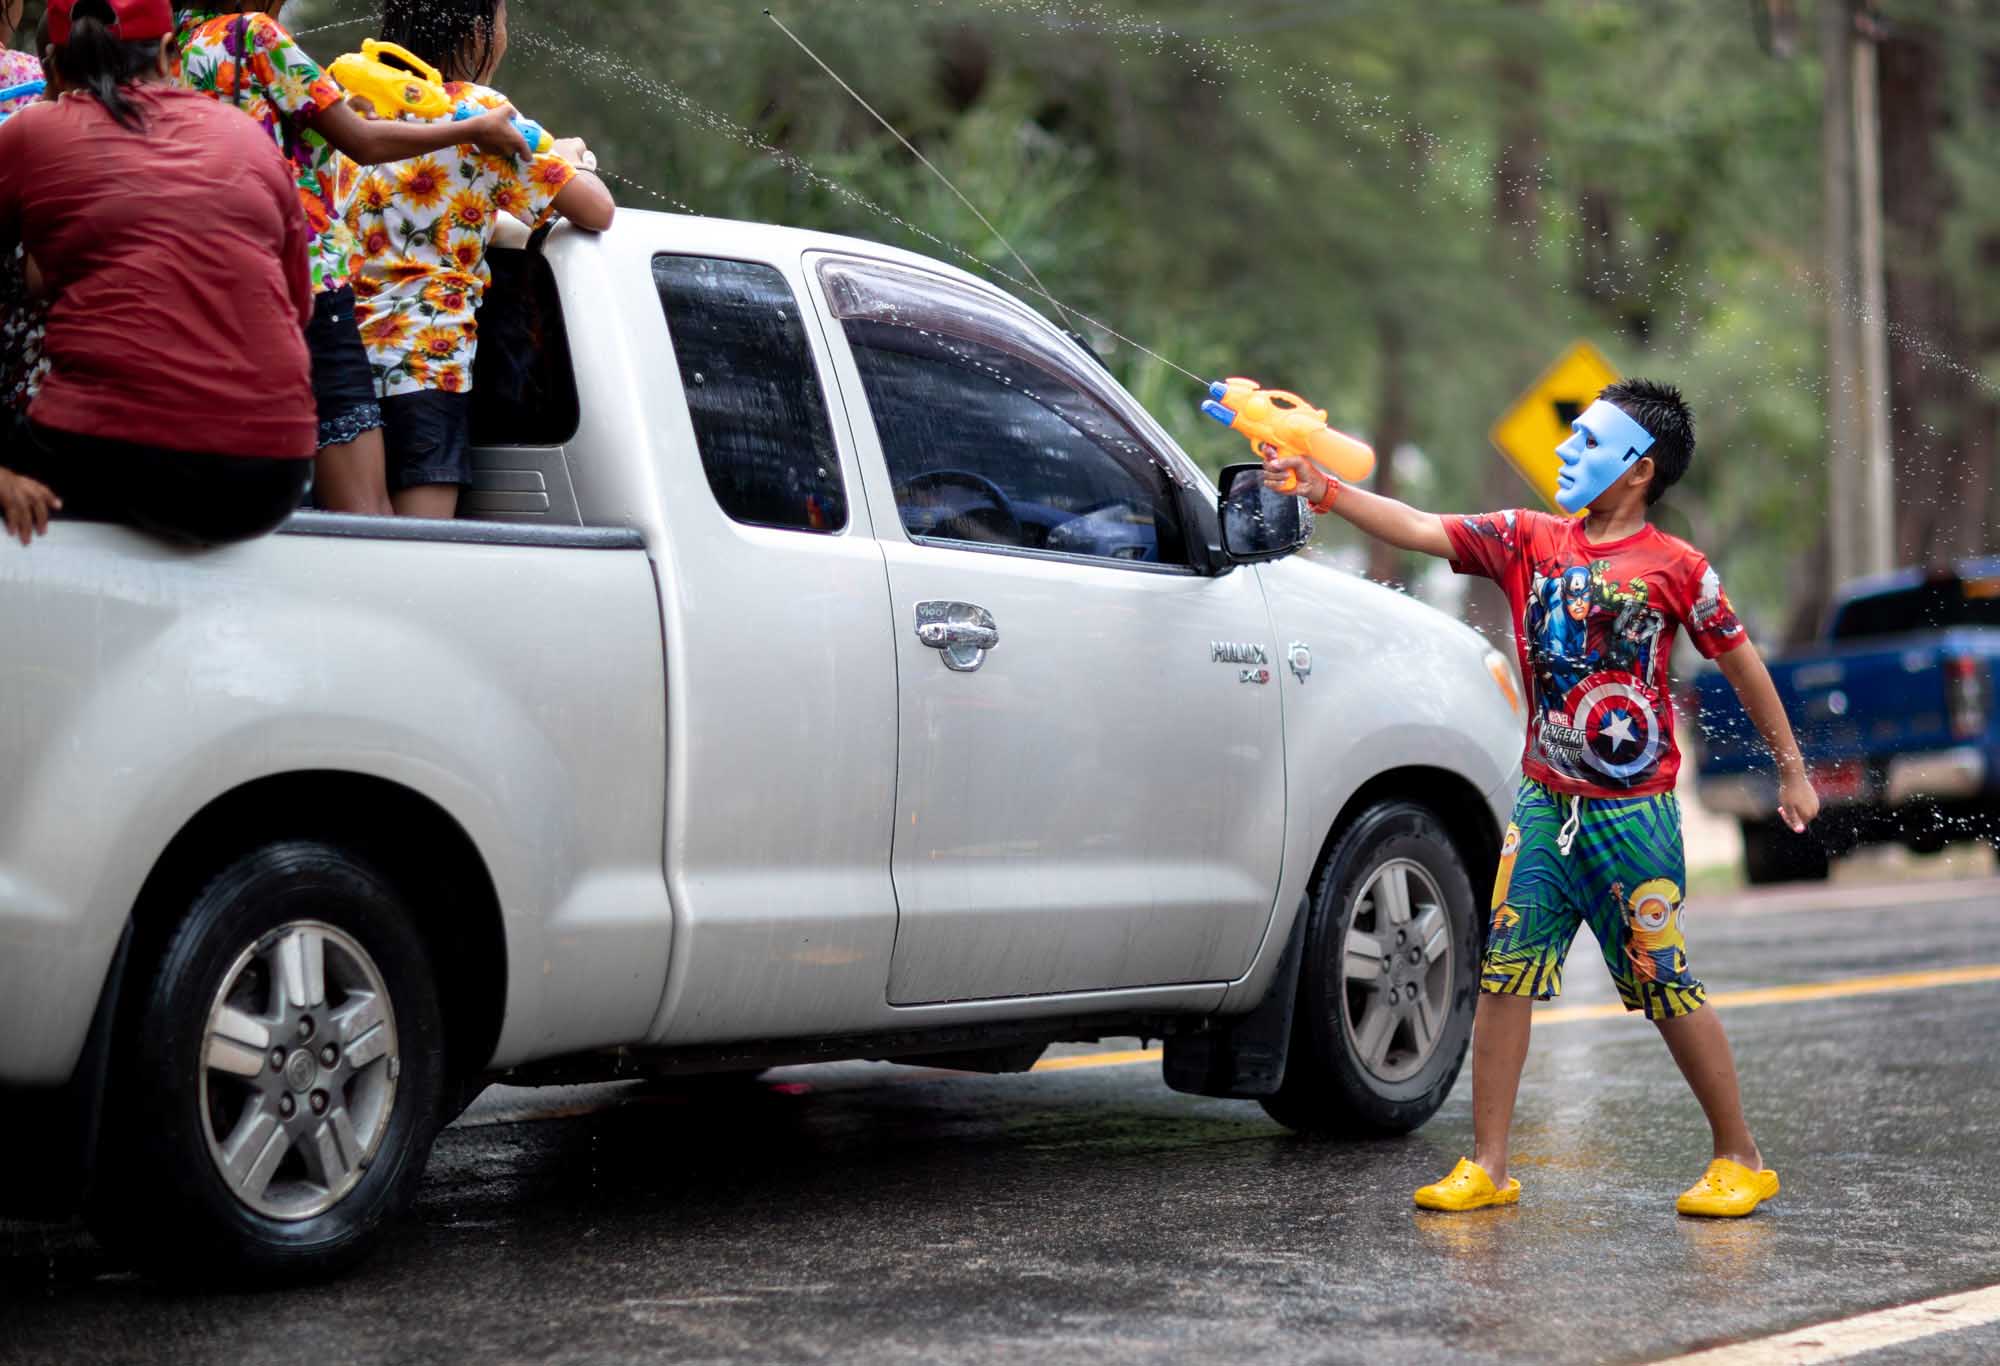 Boy with mask squirts water at truck during Songkran water festival in Phuket, Thailand | Street Photography | Travel Photography | Festival Photography